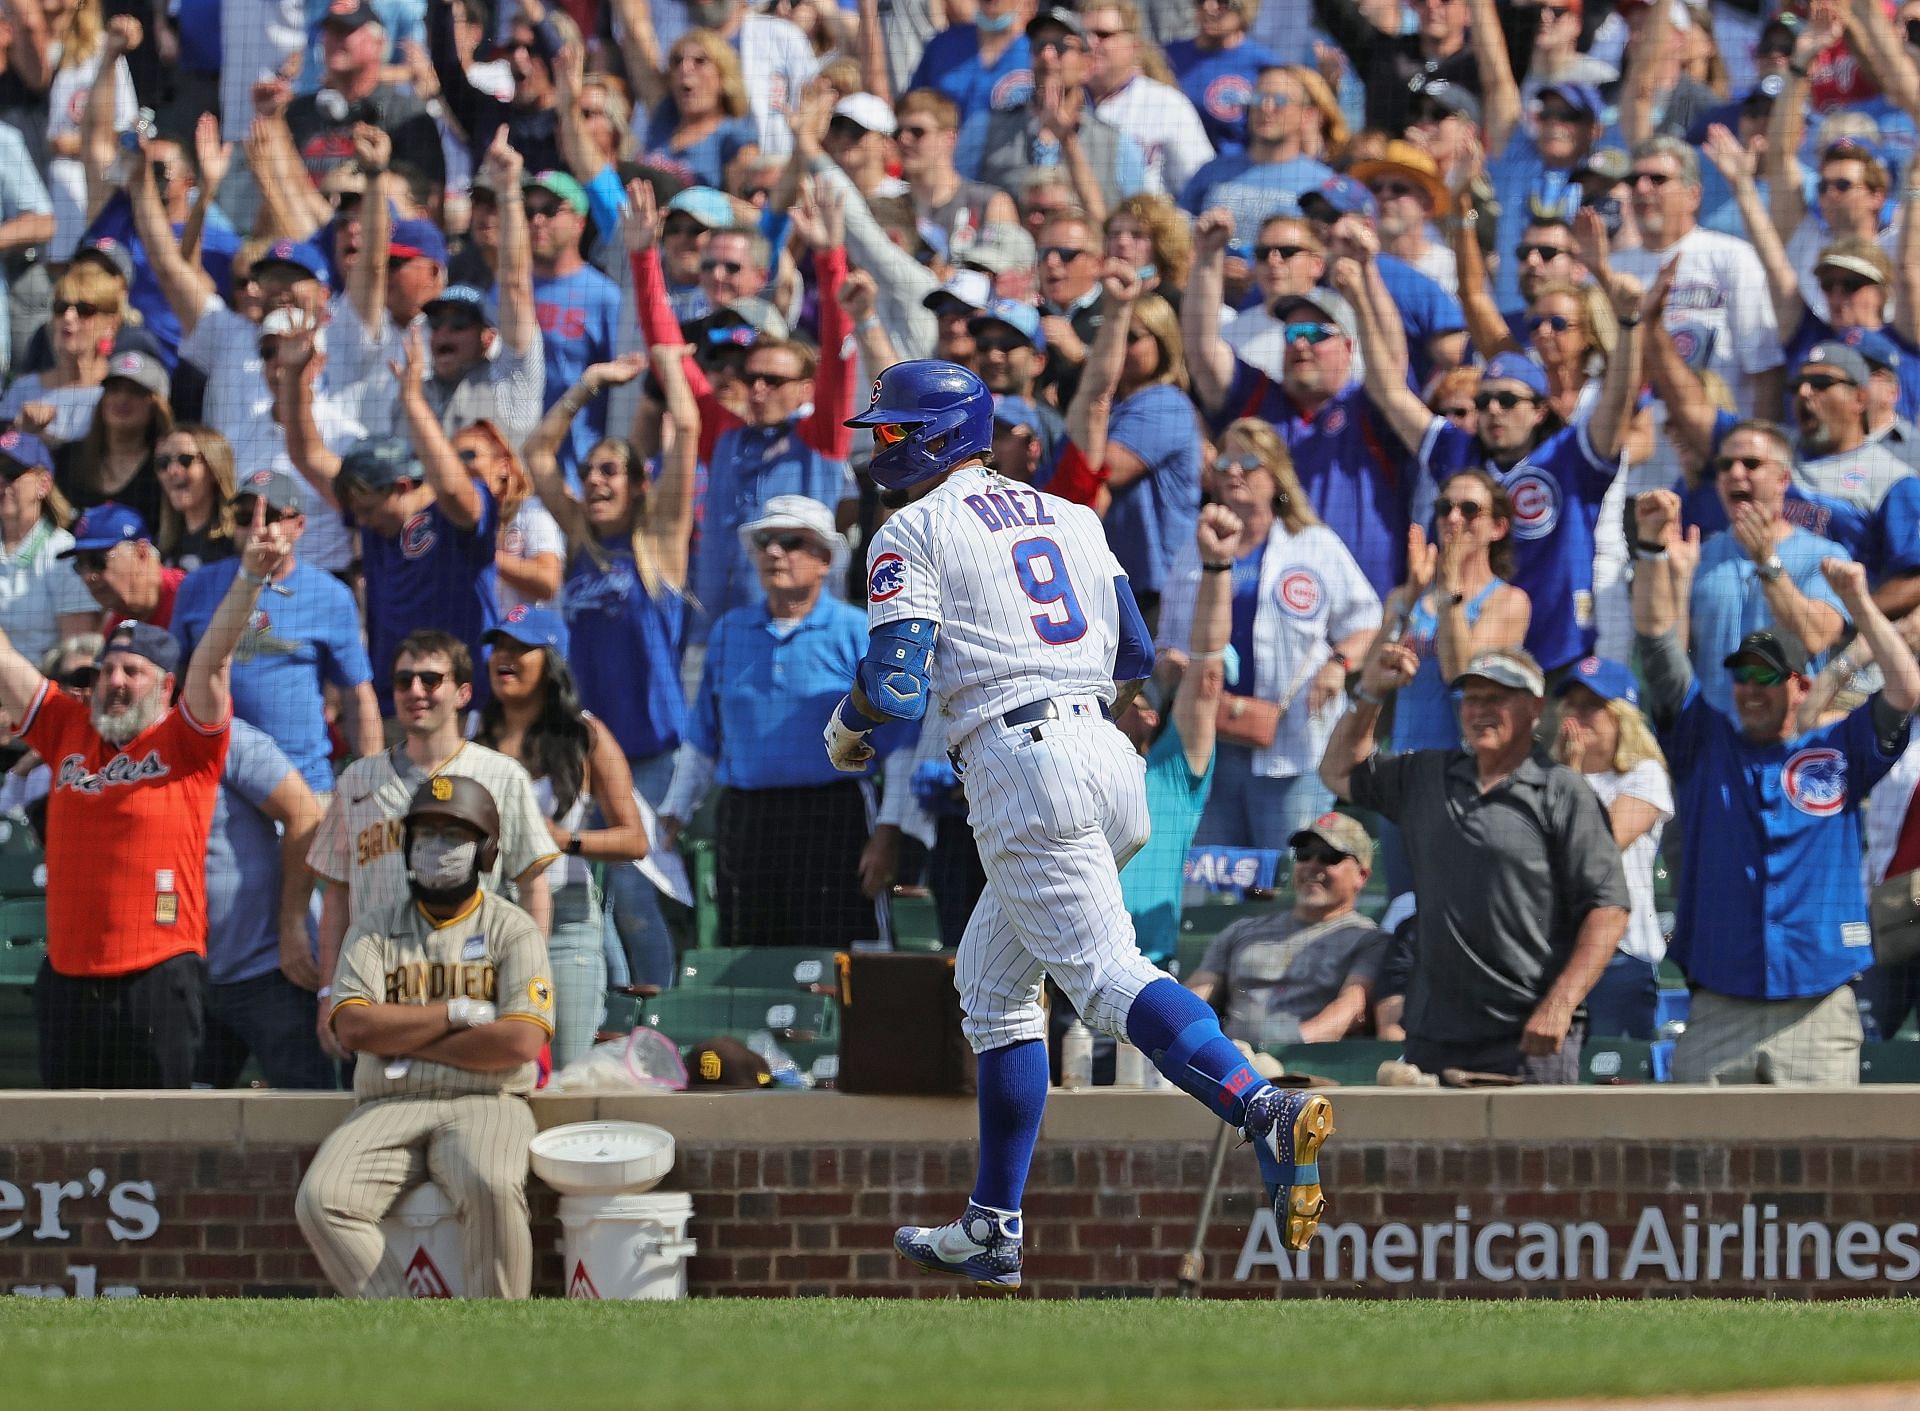 Fans cheer as Javier Baez of the Chicago Cubs runs the bases after hitting a solo home run against the San Diego Padres.